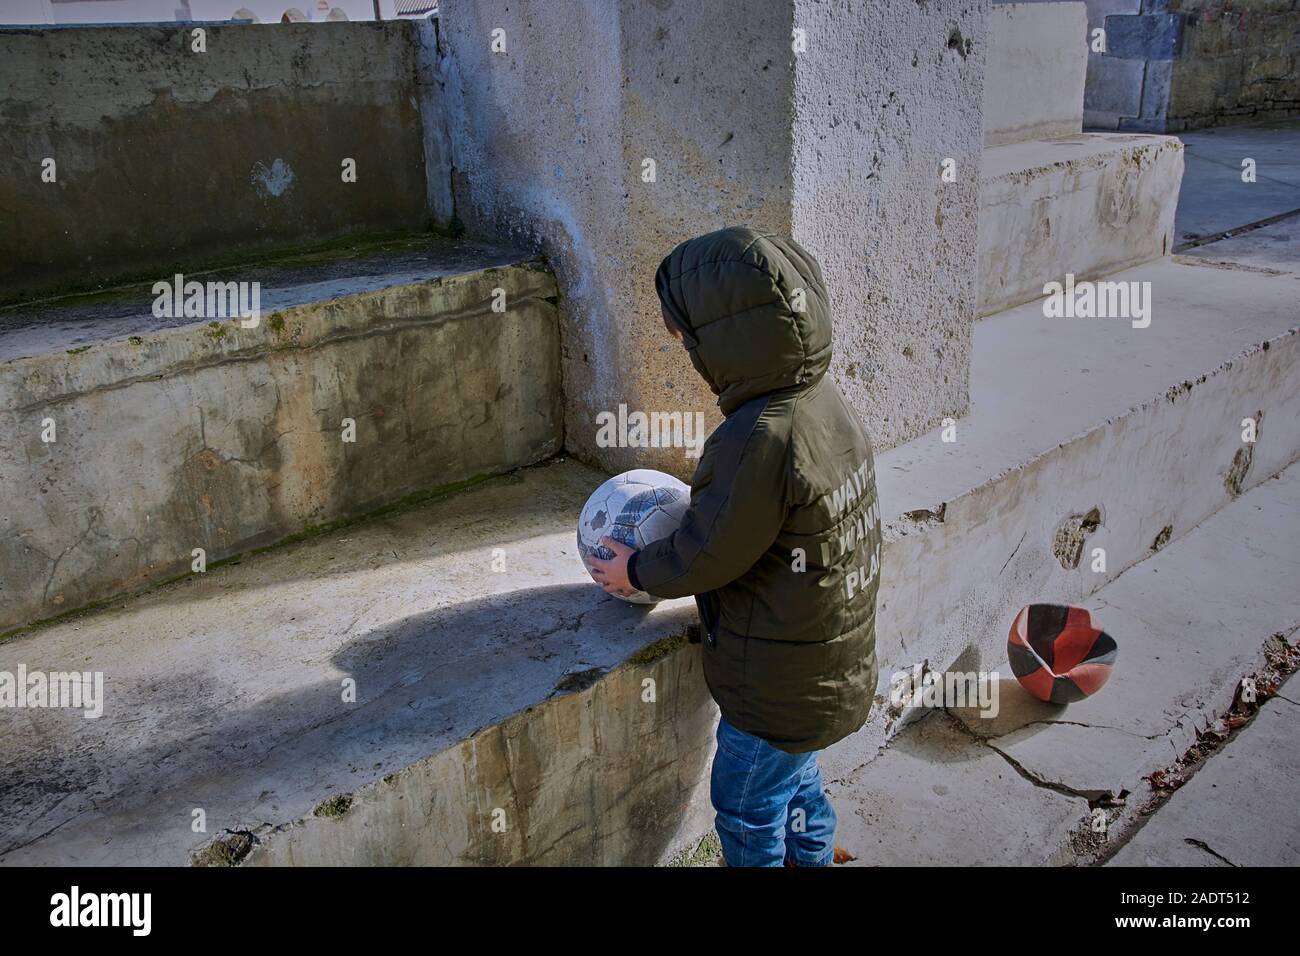 Boy in blue trousers and green jacket playing ball on cement stairs. Stock Photo